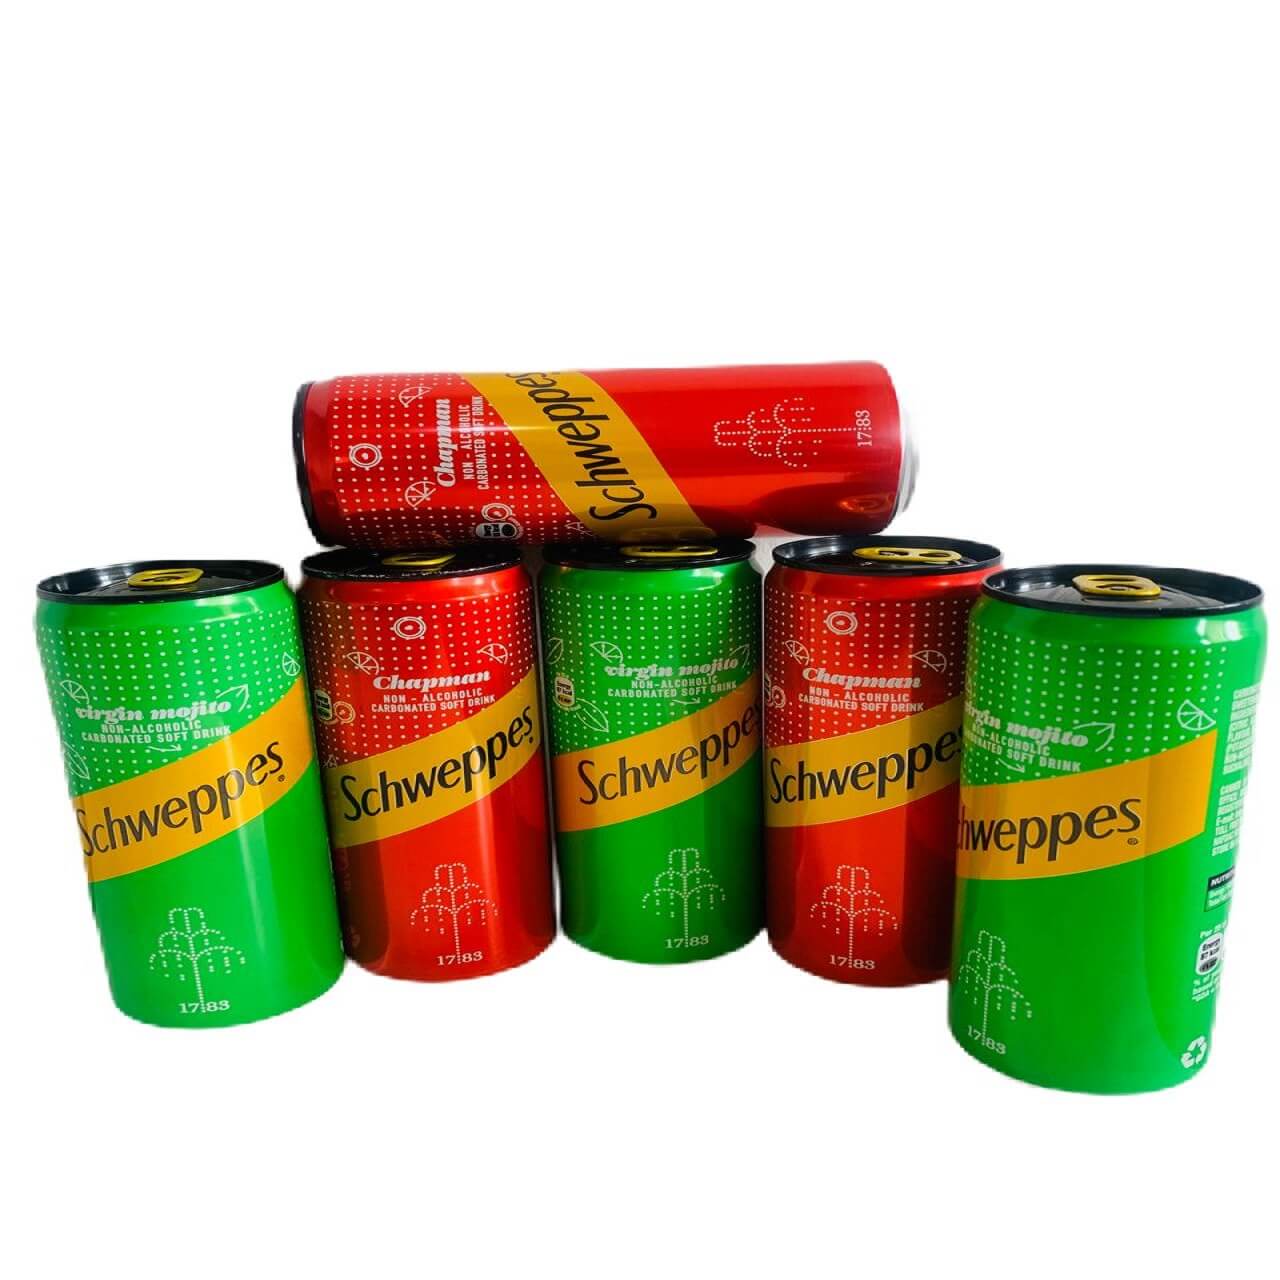 cans of schweppes